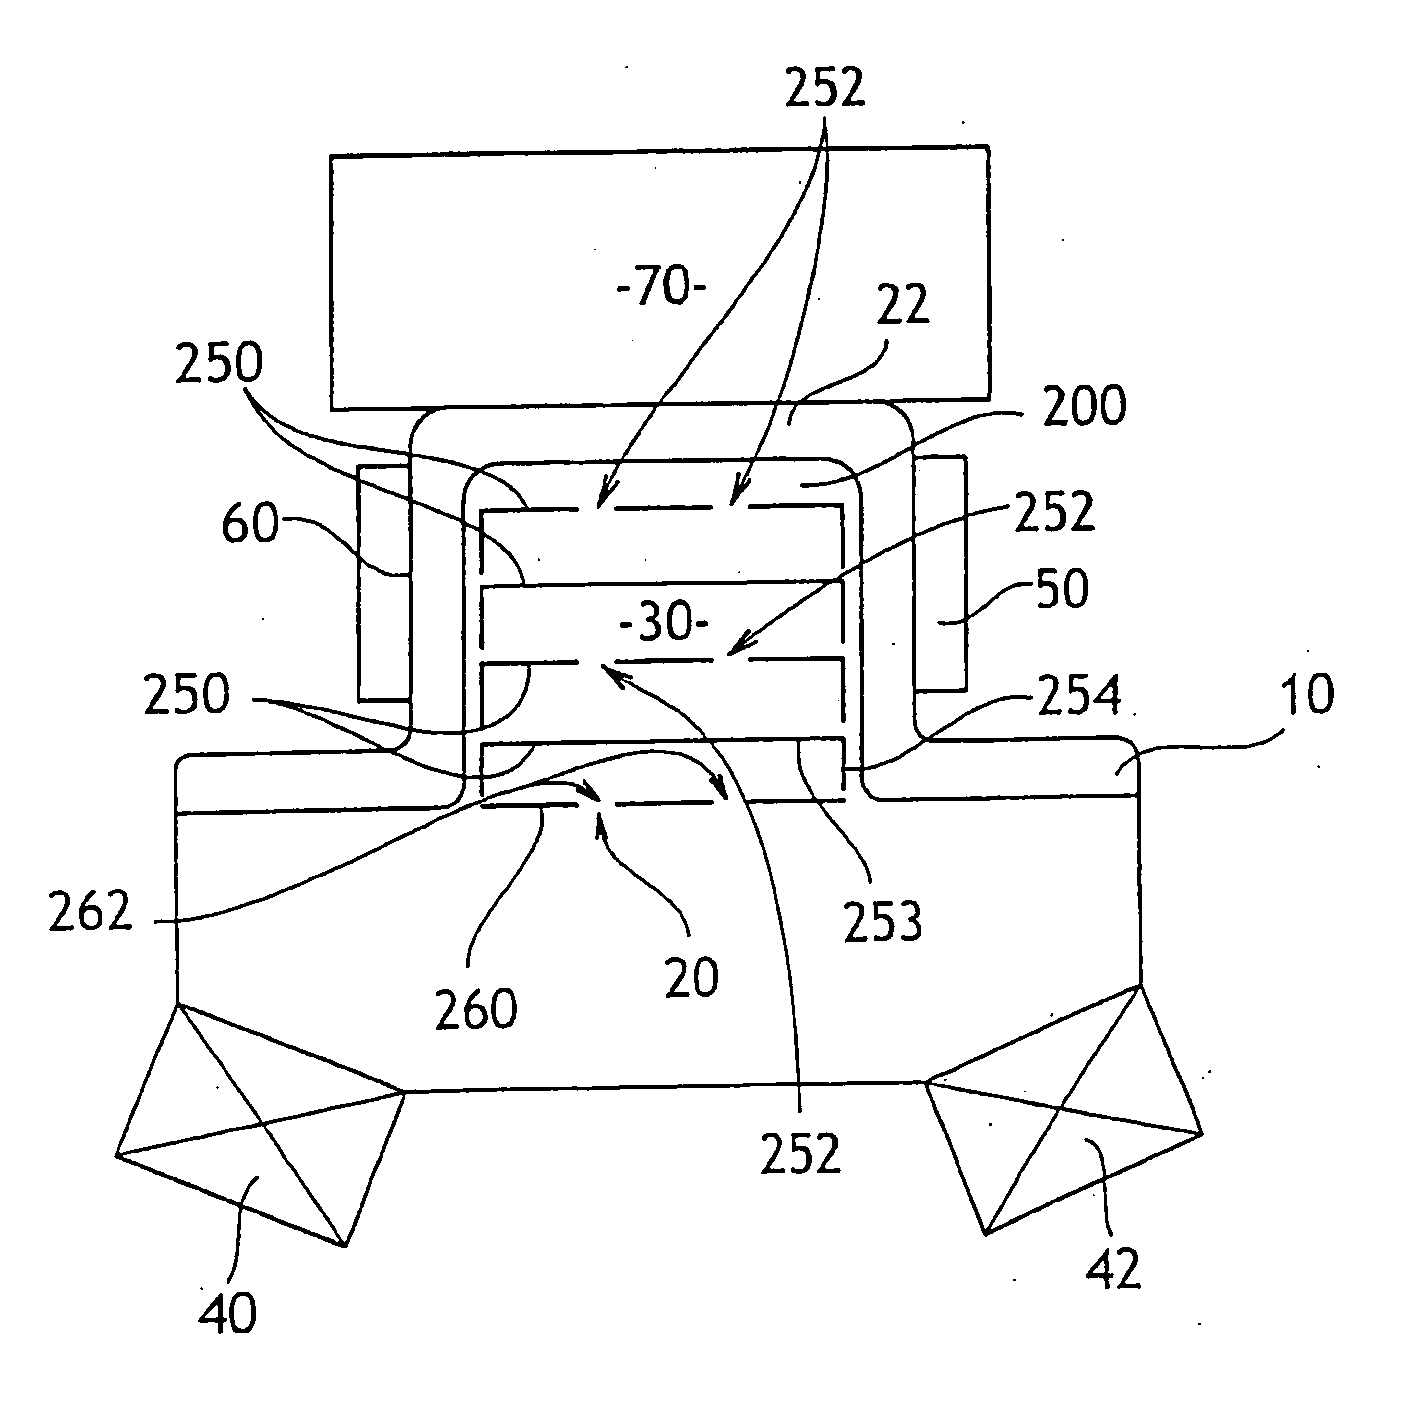 Thermally-controlled actuator device